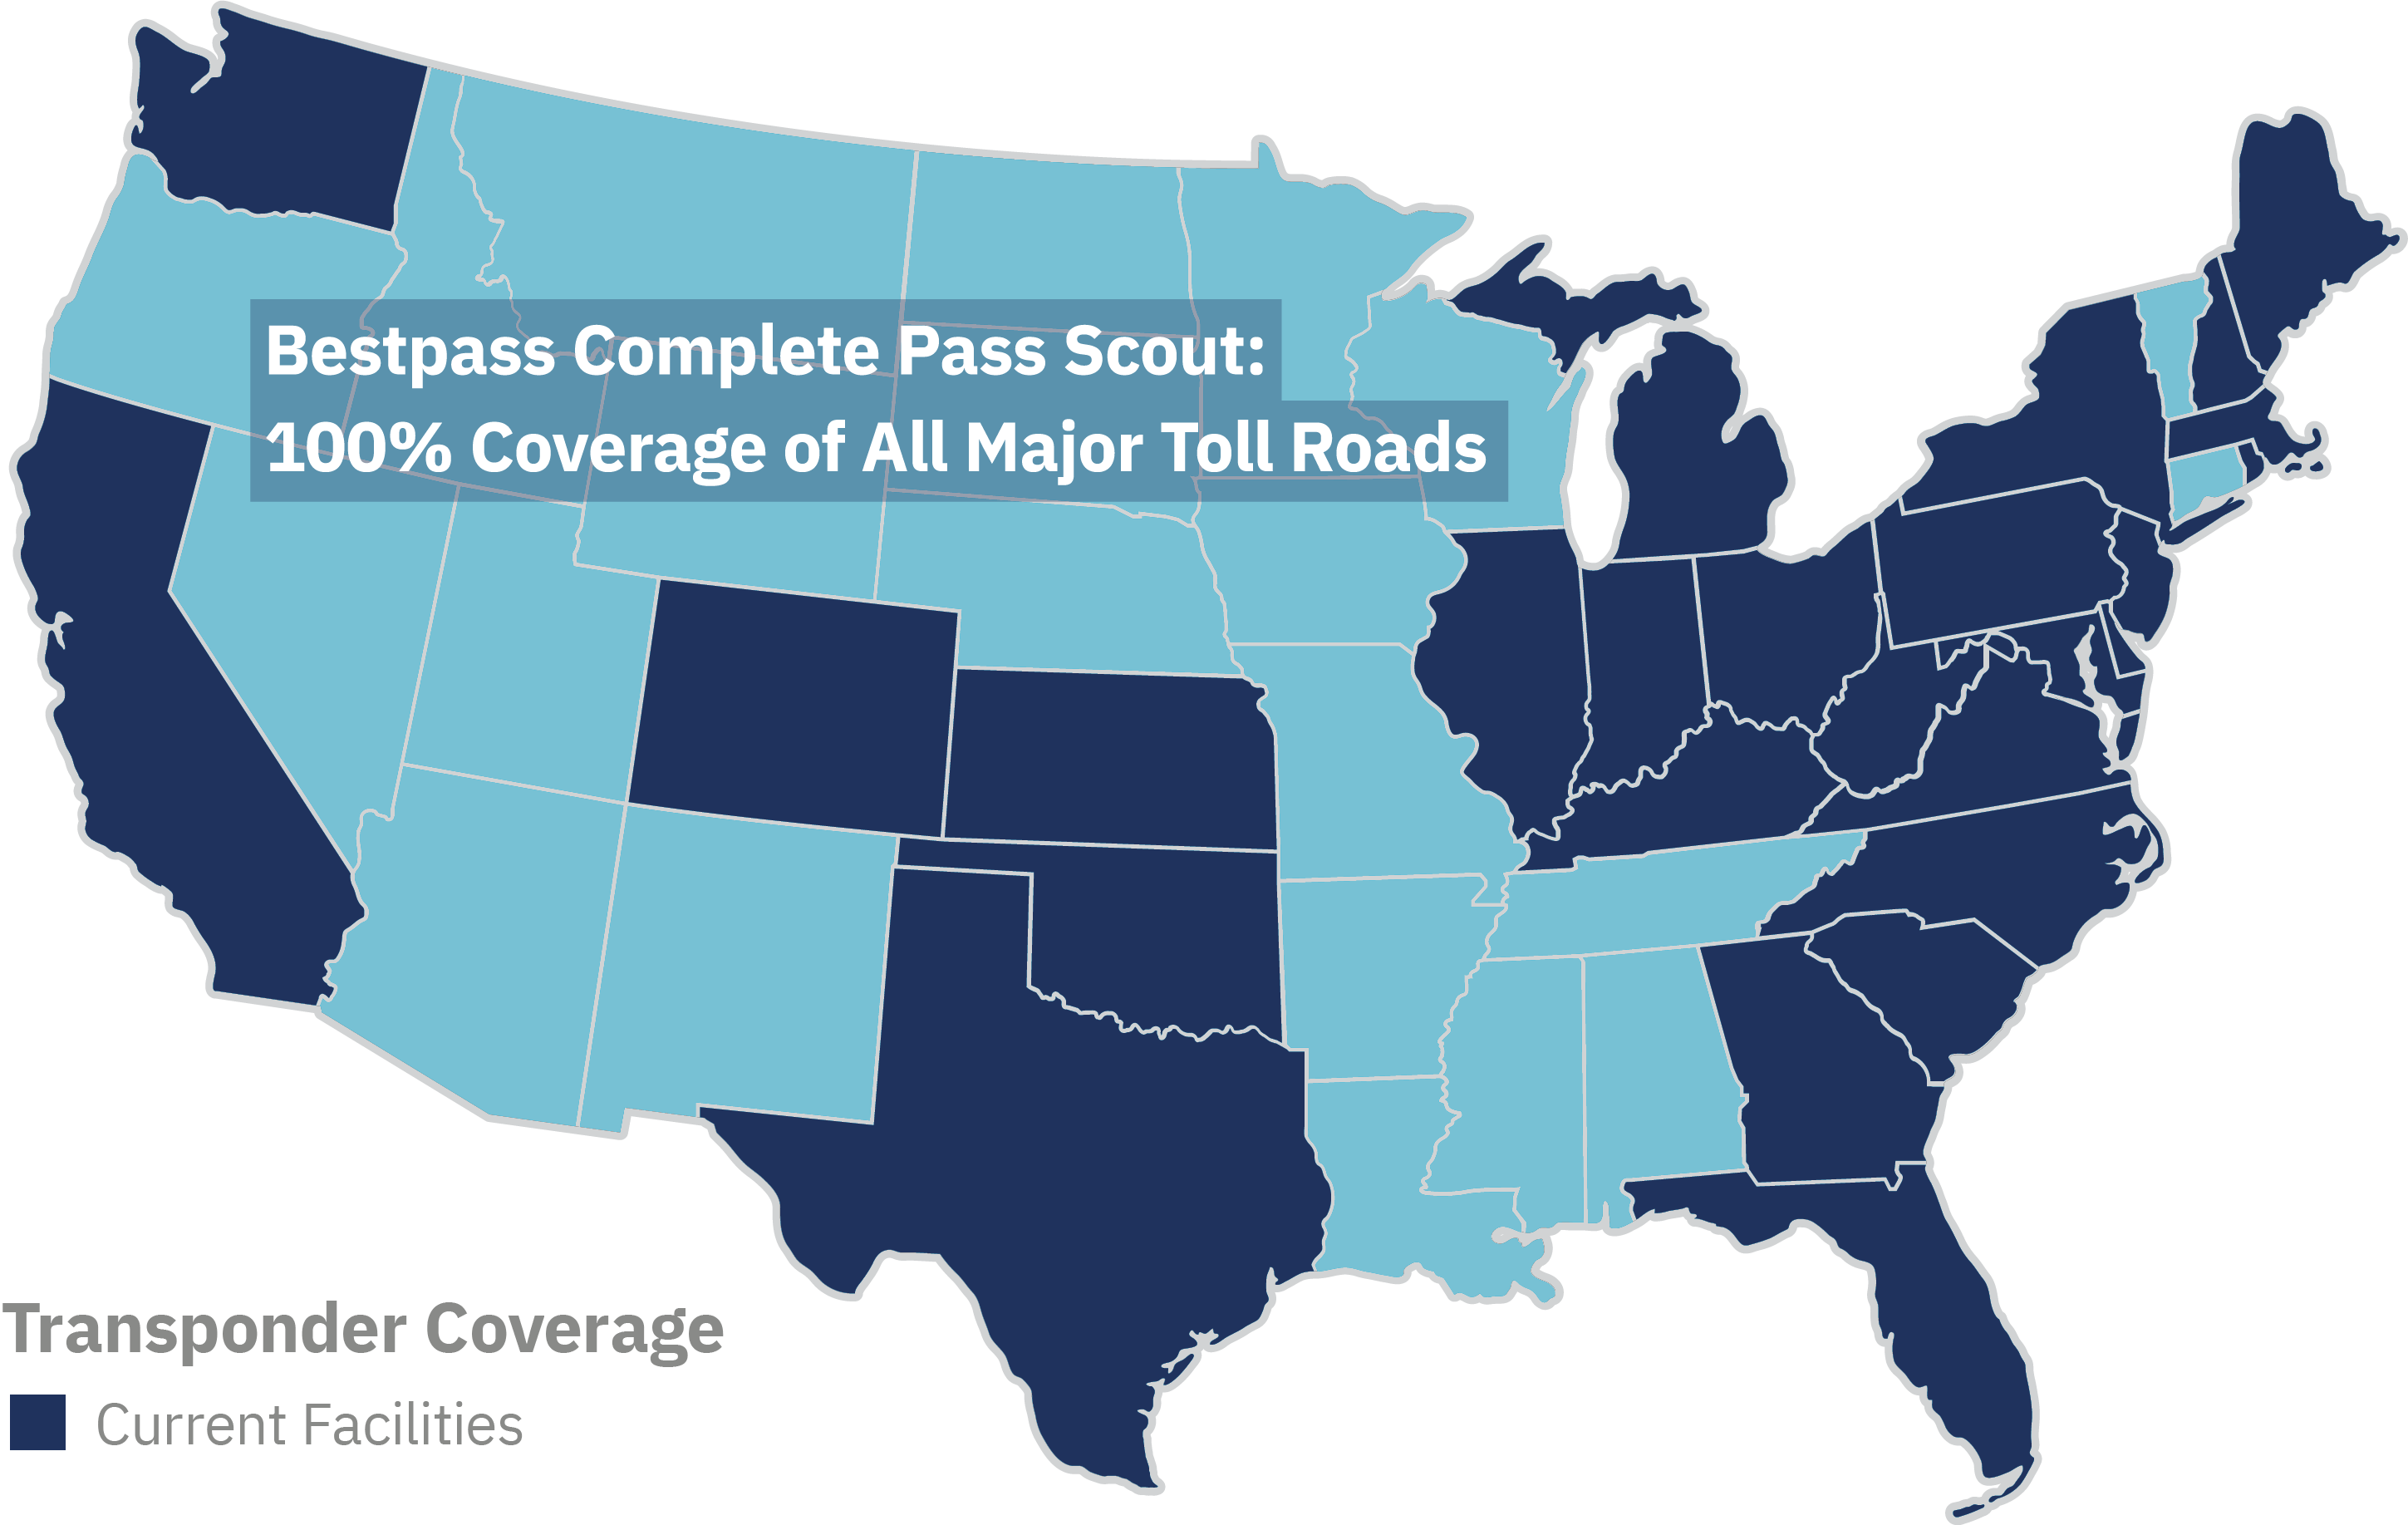 Bestpass Complete Pass Scout Nationwide Coverage